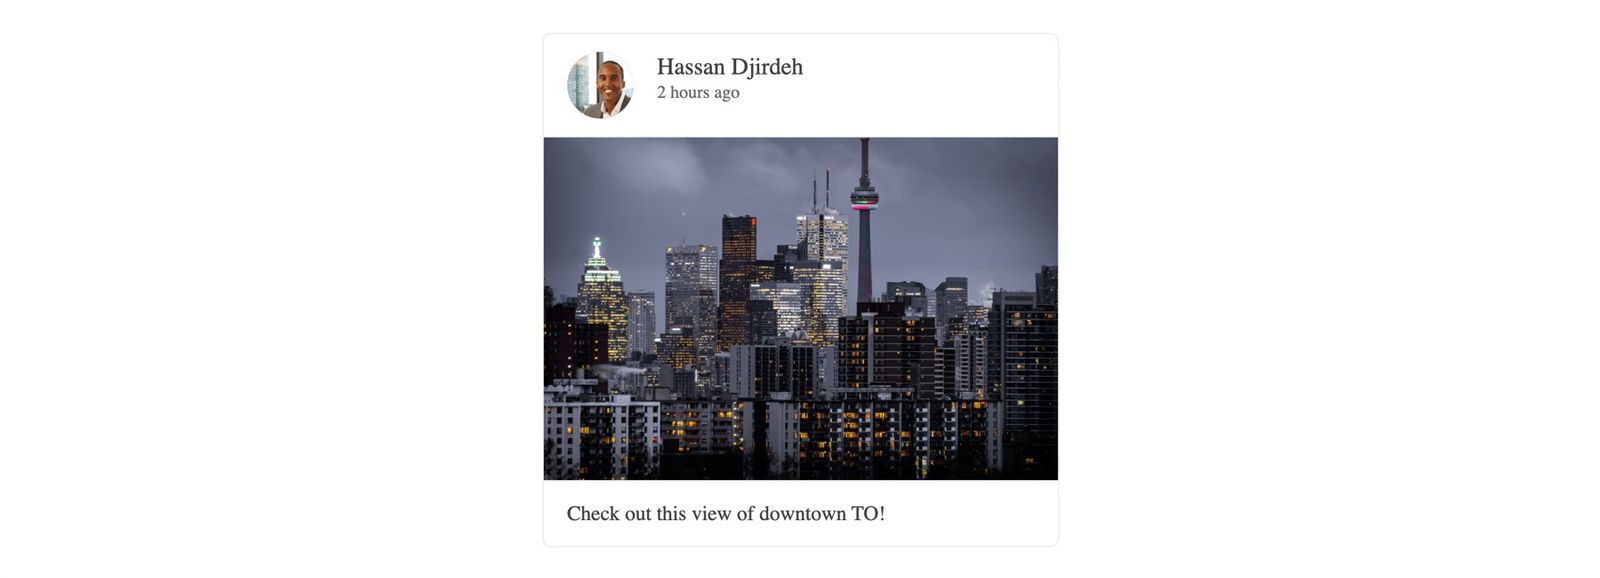 The card has Hassan Djirdeh's name and small avatar at the top with '2 hours ago'. Then a large image of a city. Below is the caption: Check out this view of downtown TO!